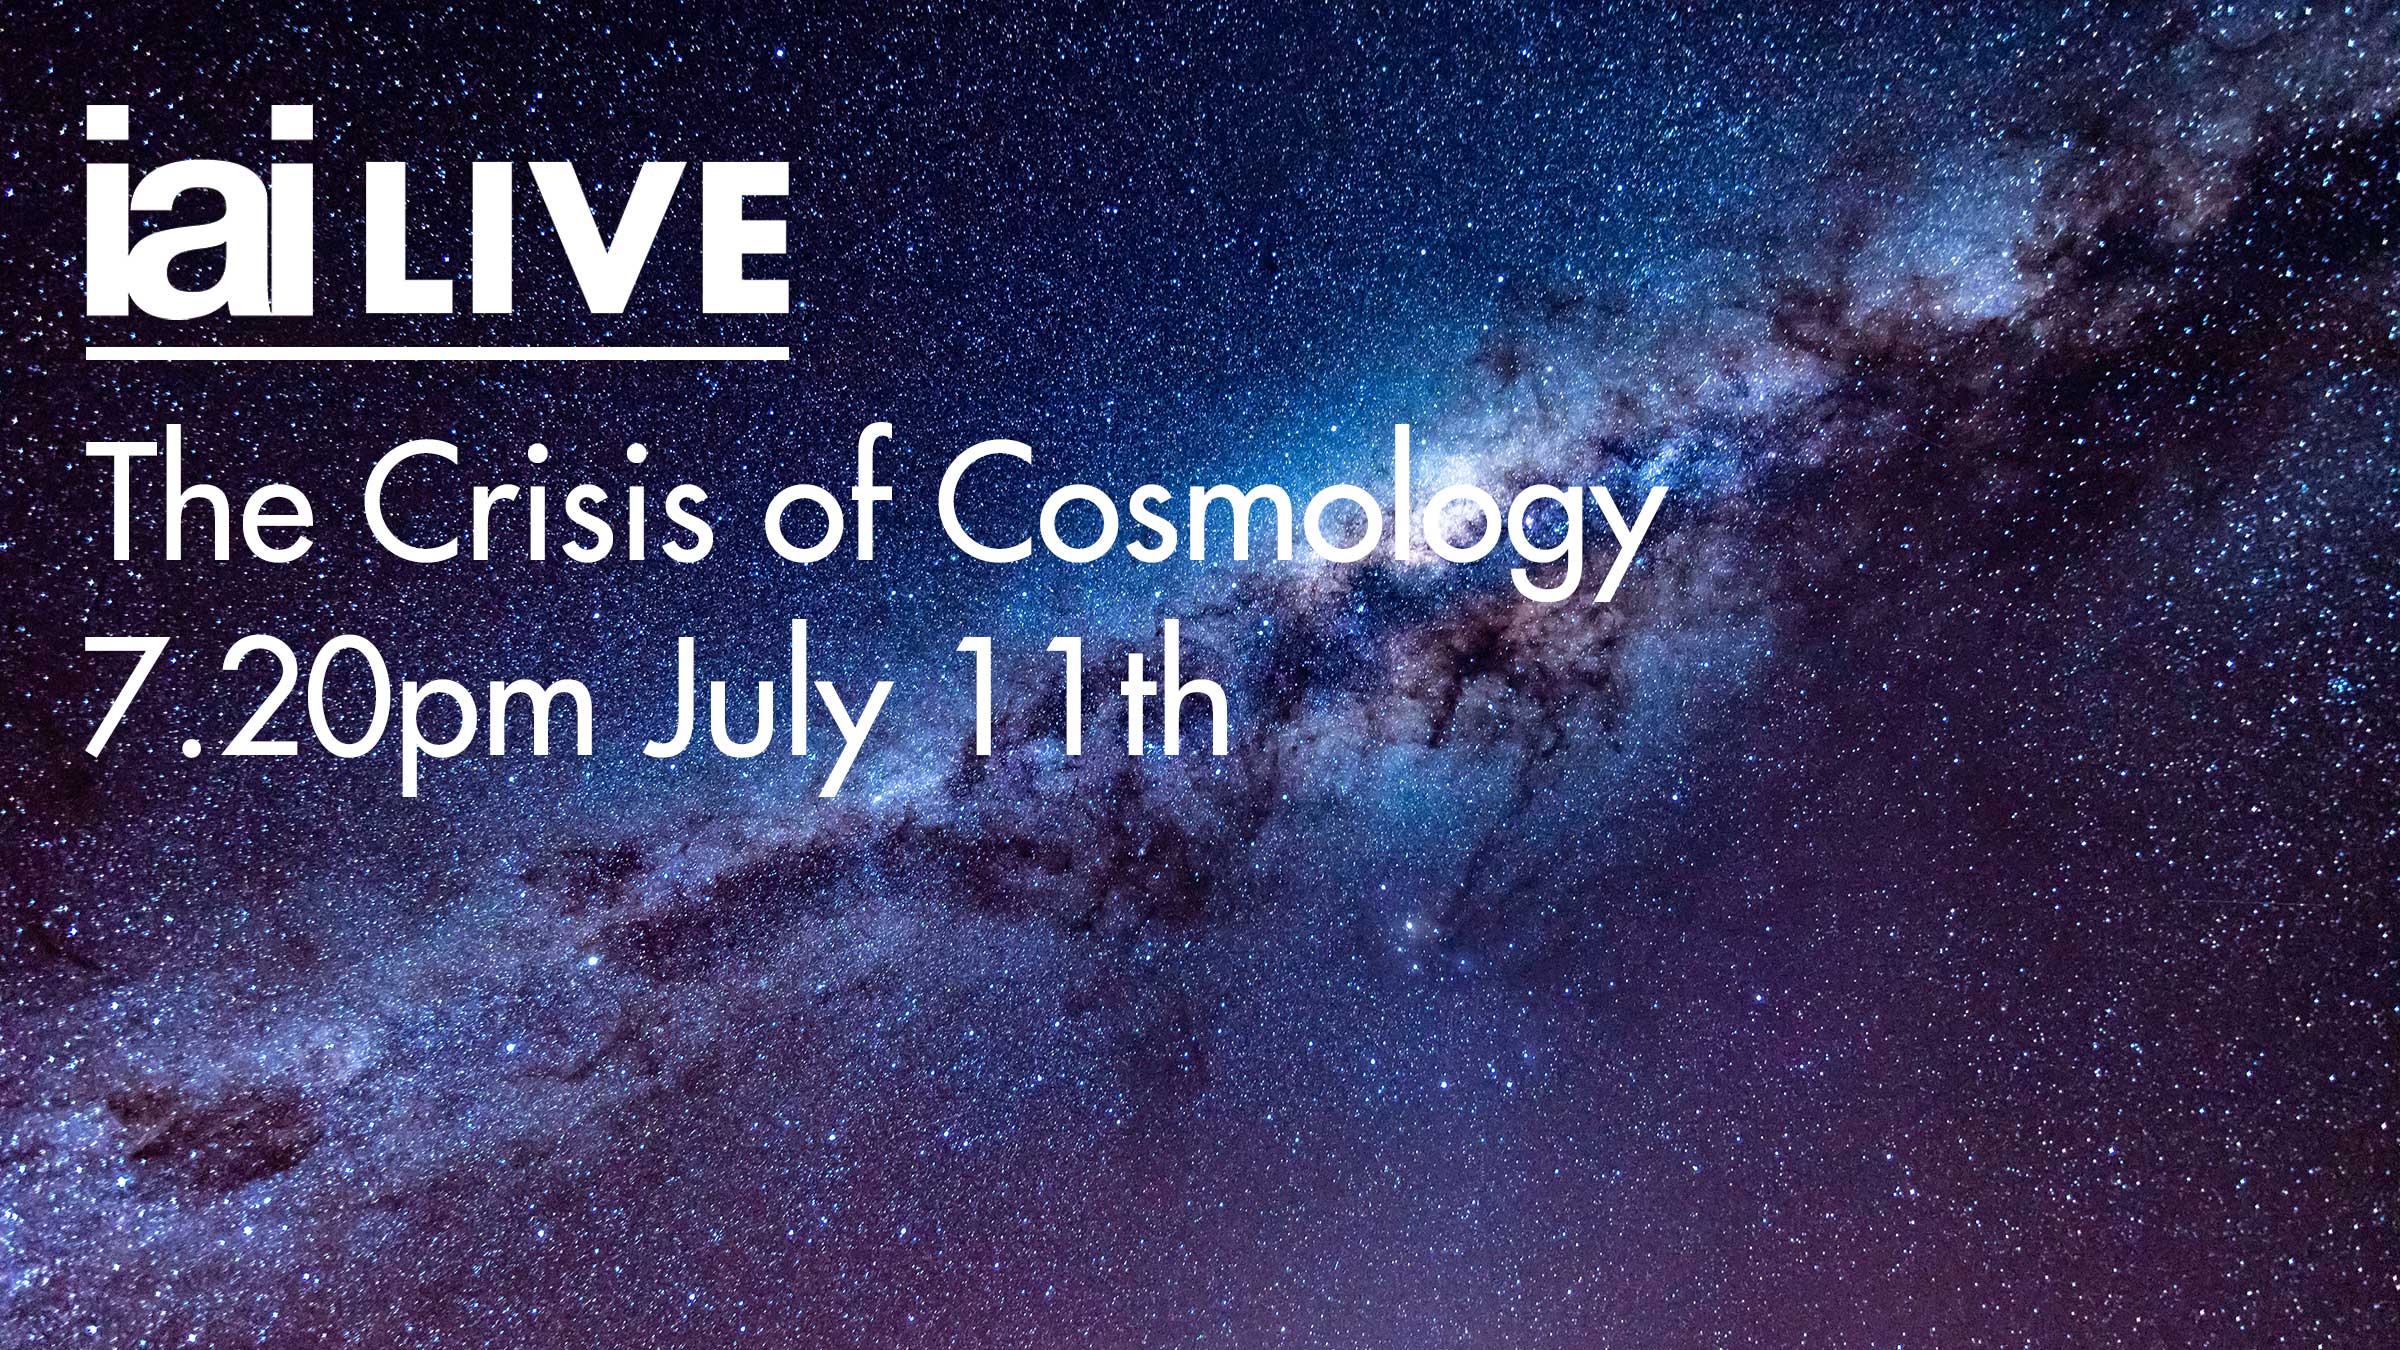 Talk - The Crisis of Cosmology